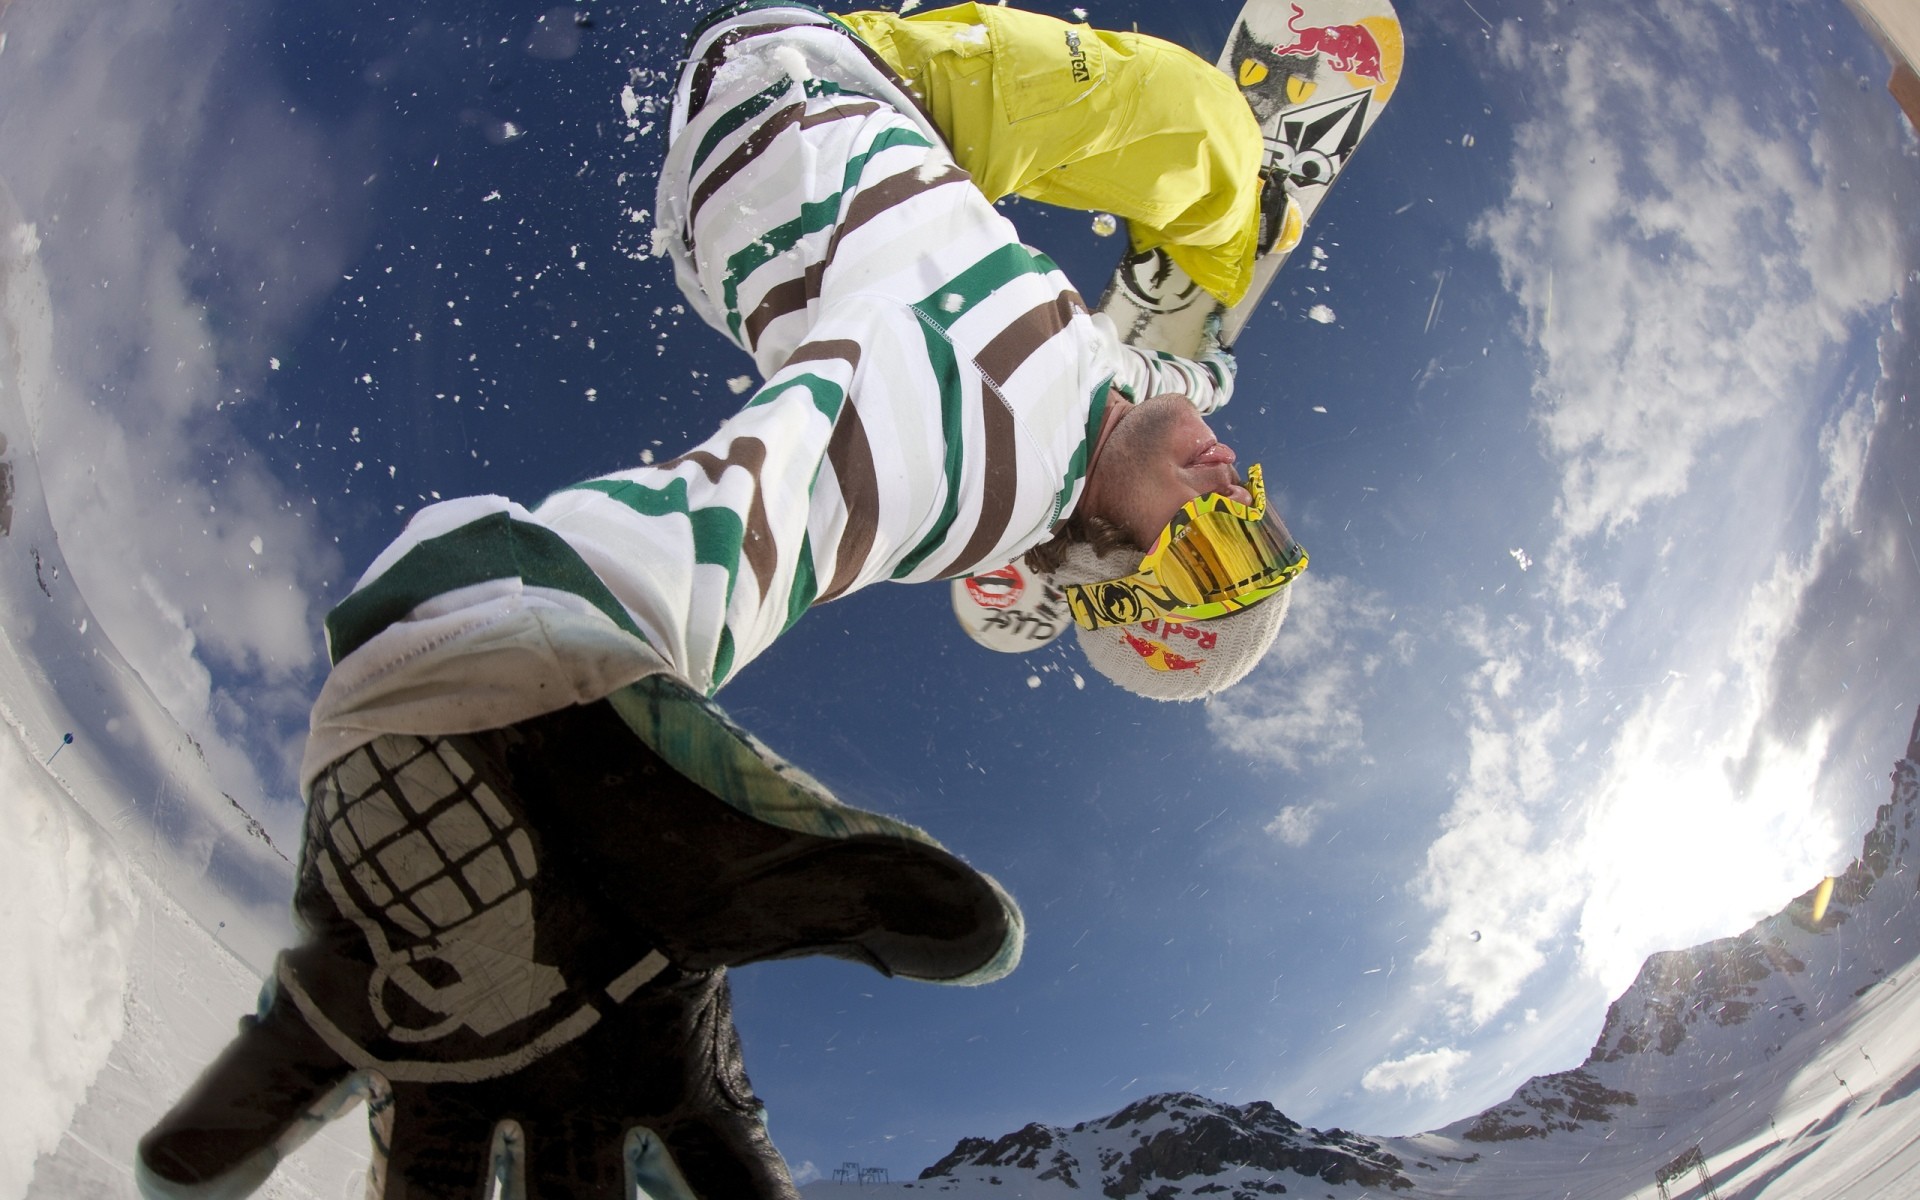 1920x1200 HD Snowboarding Wallpapers and Photos | HD Sports Wallpapers